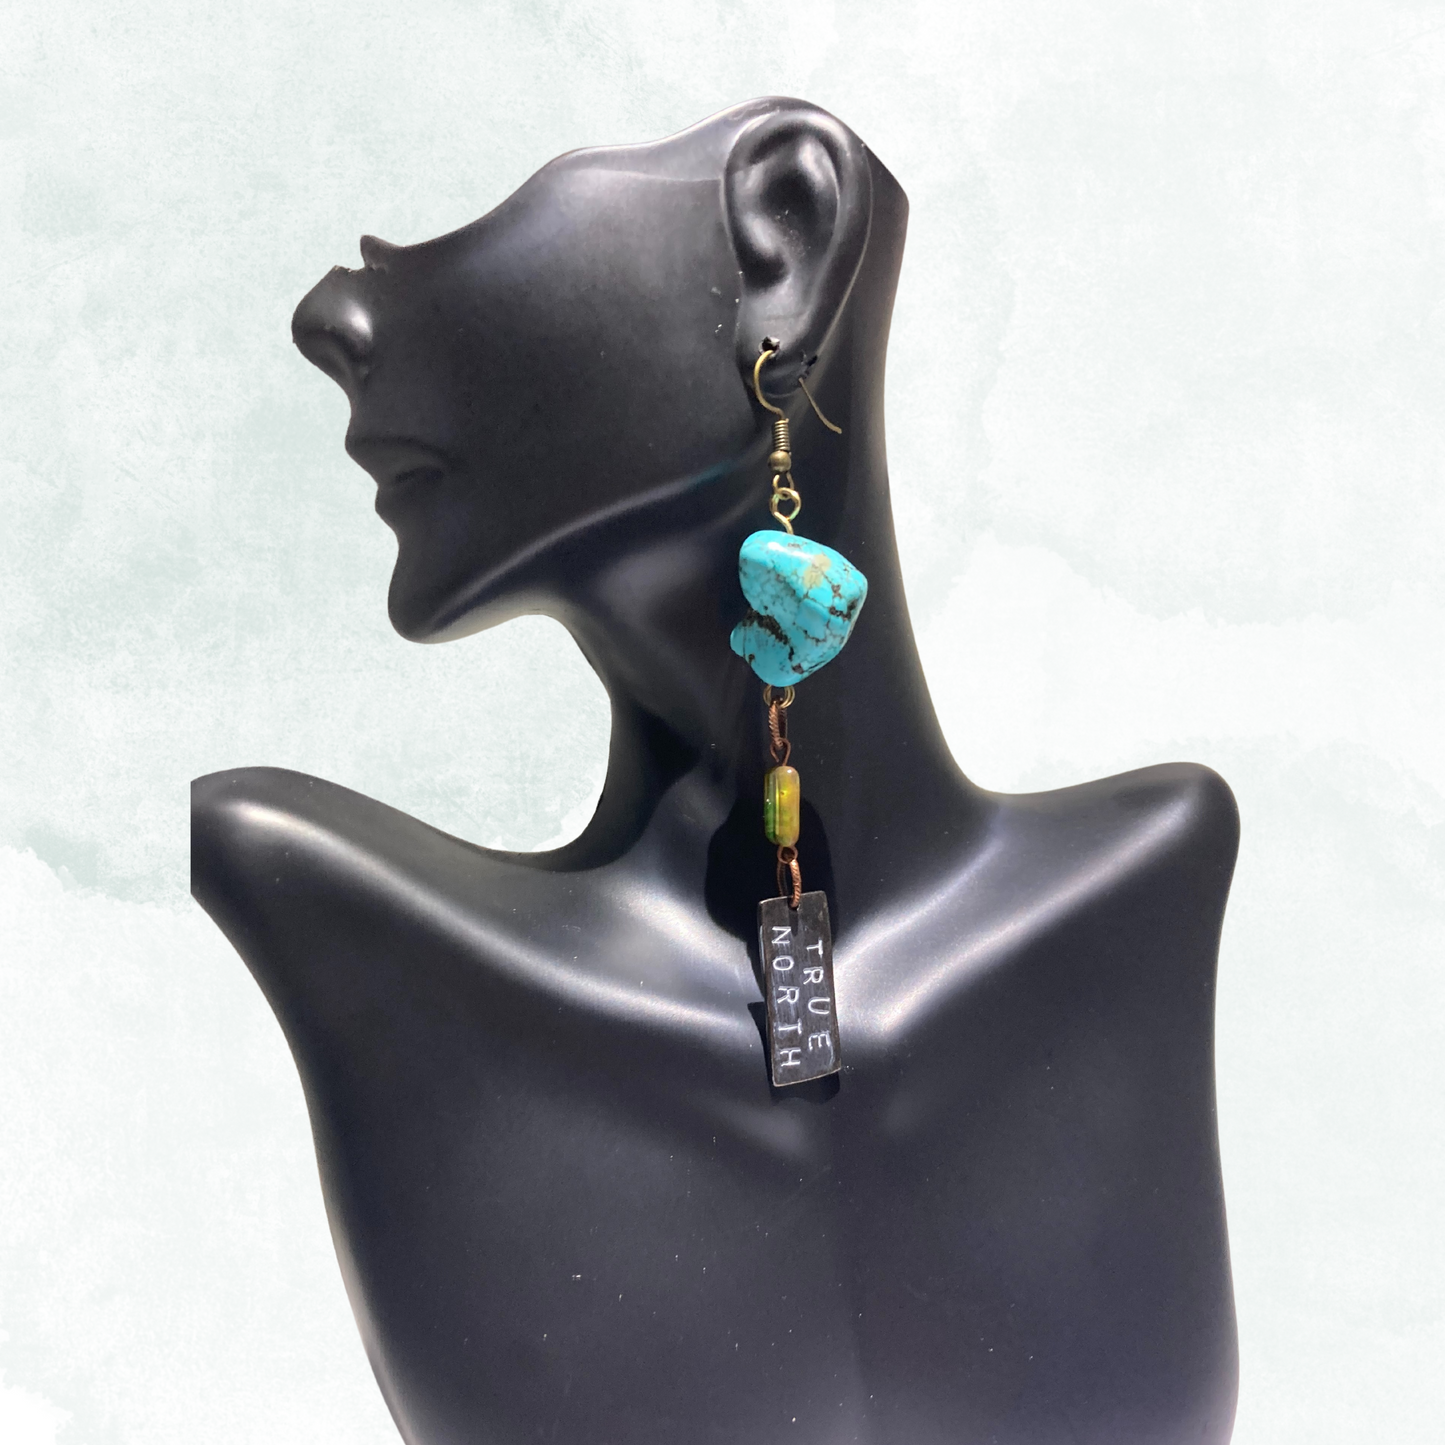 Turquoise "True North" Earrings